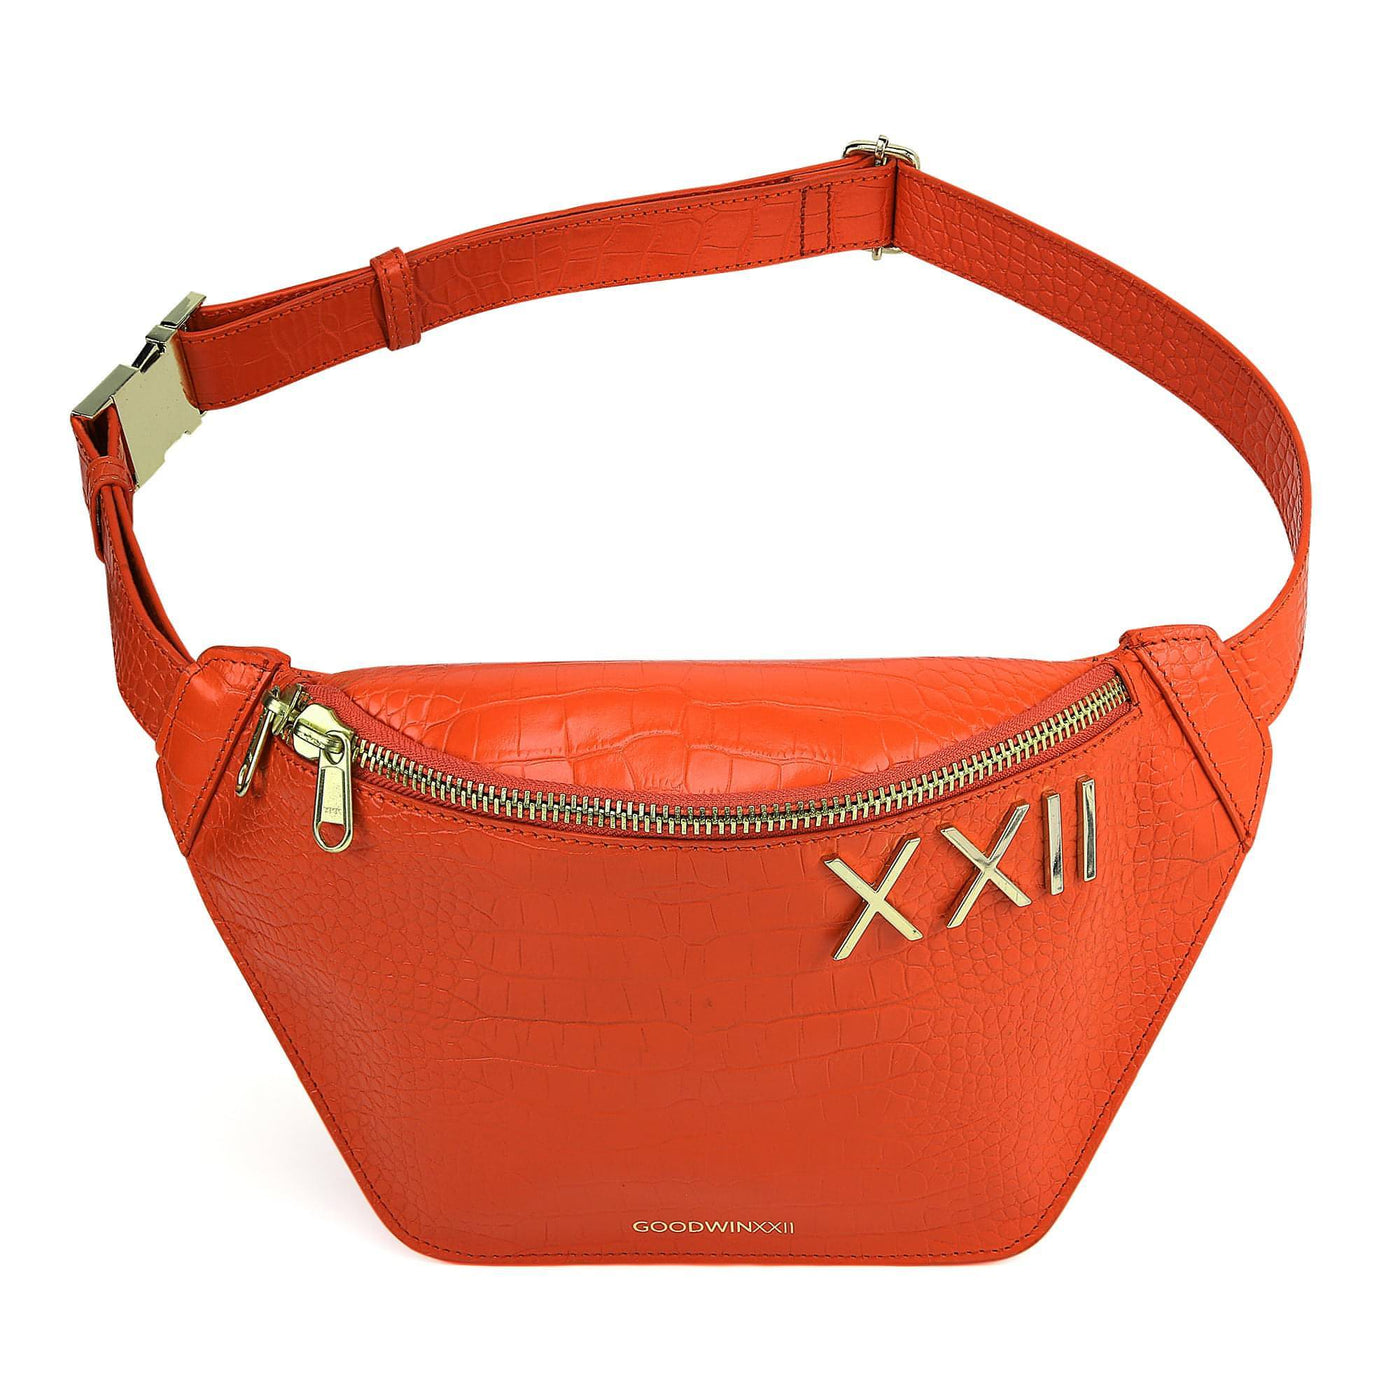 Goodwinxxii orange croc embossed leather fanny pack with gold hardware